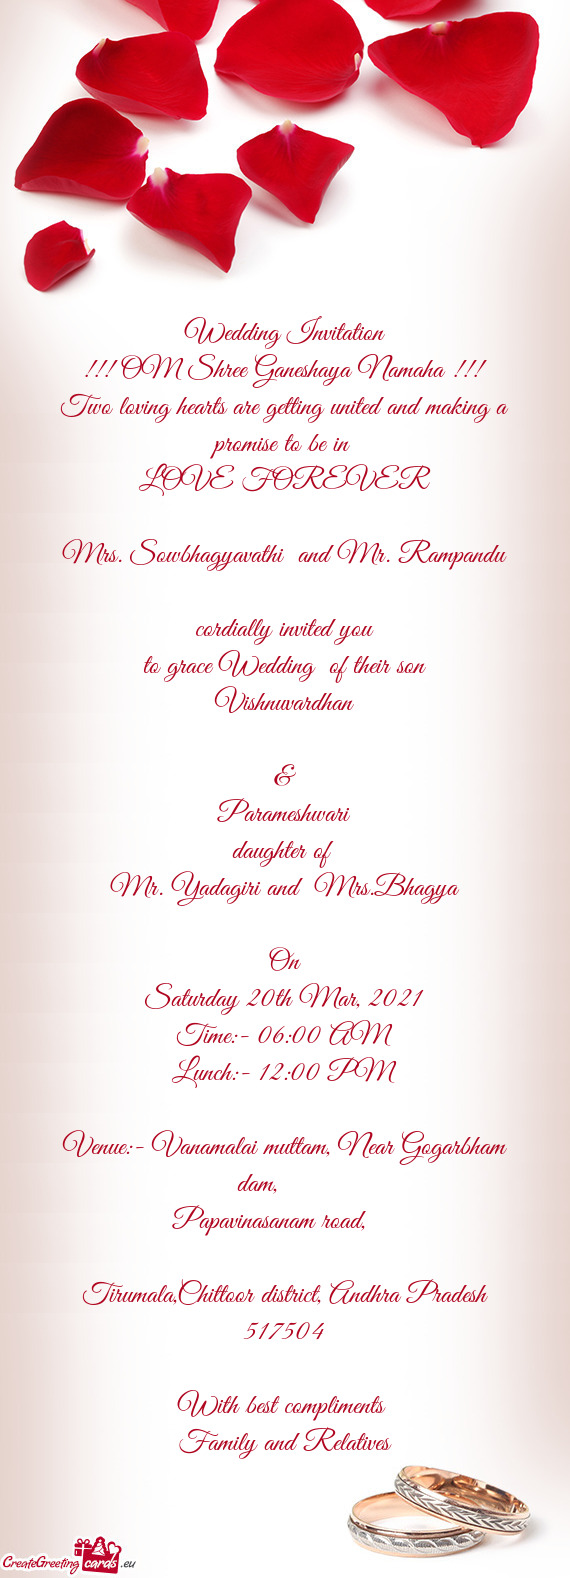 Cordially invited you